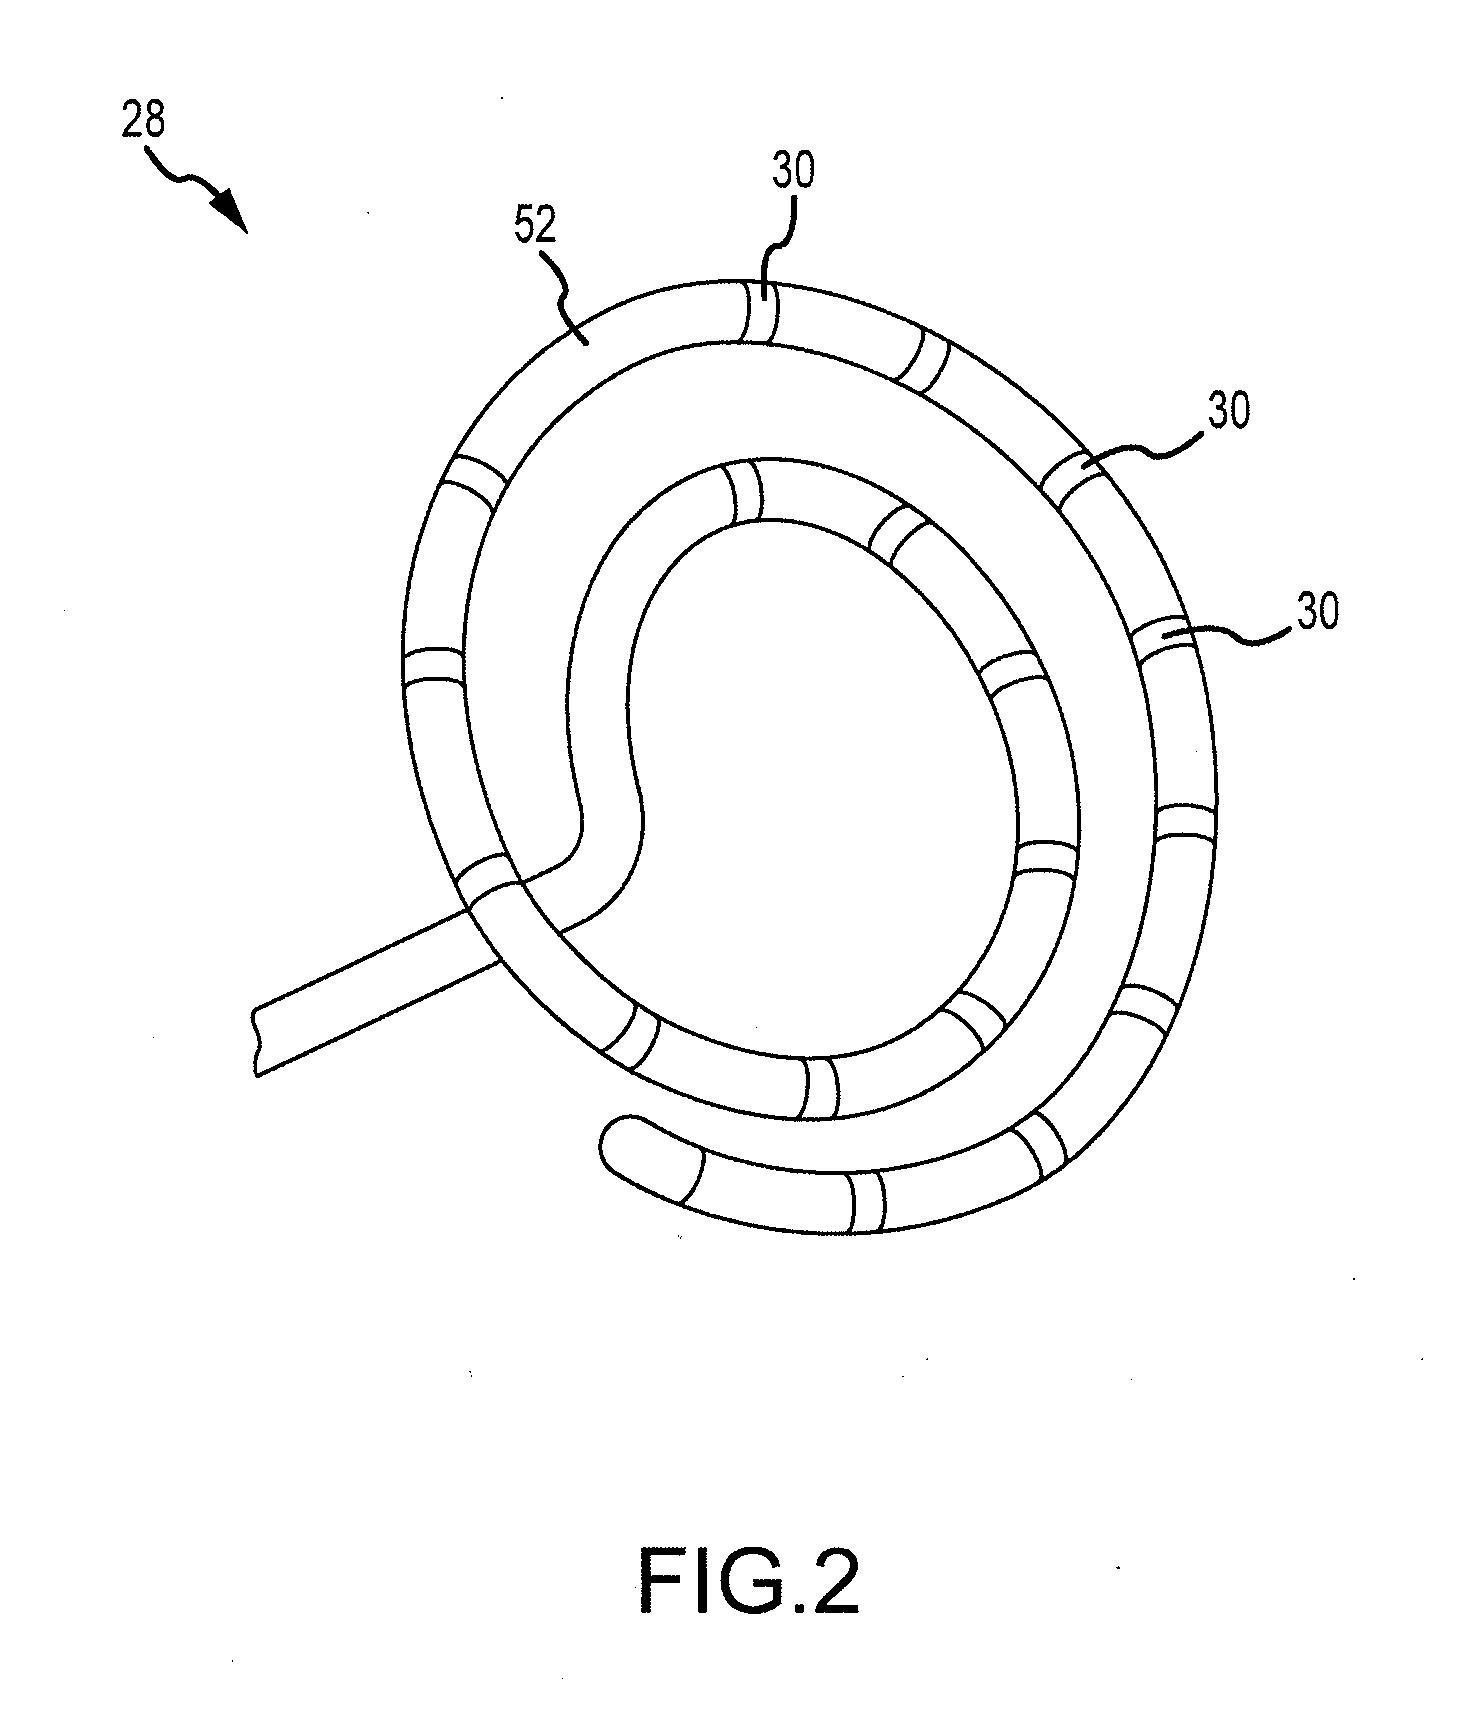 System and Method for Diagnosing Arrhythmias and Directing Catheter Therapies